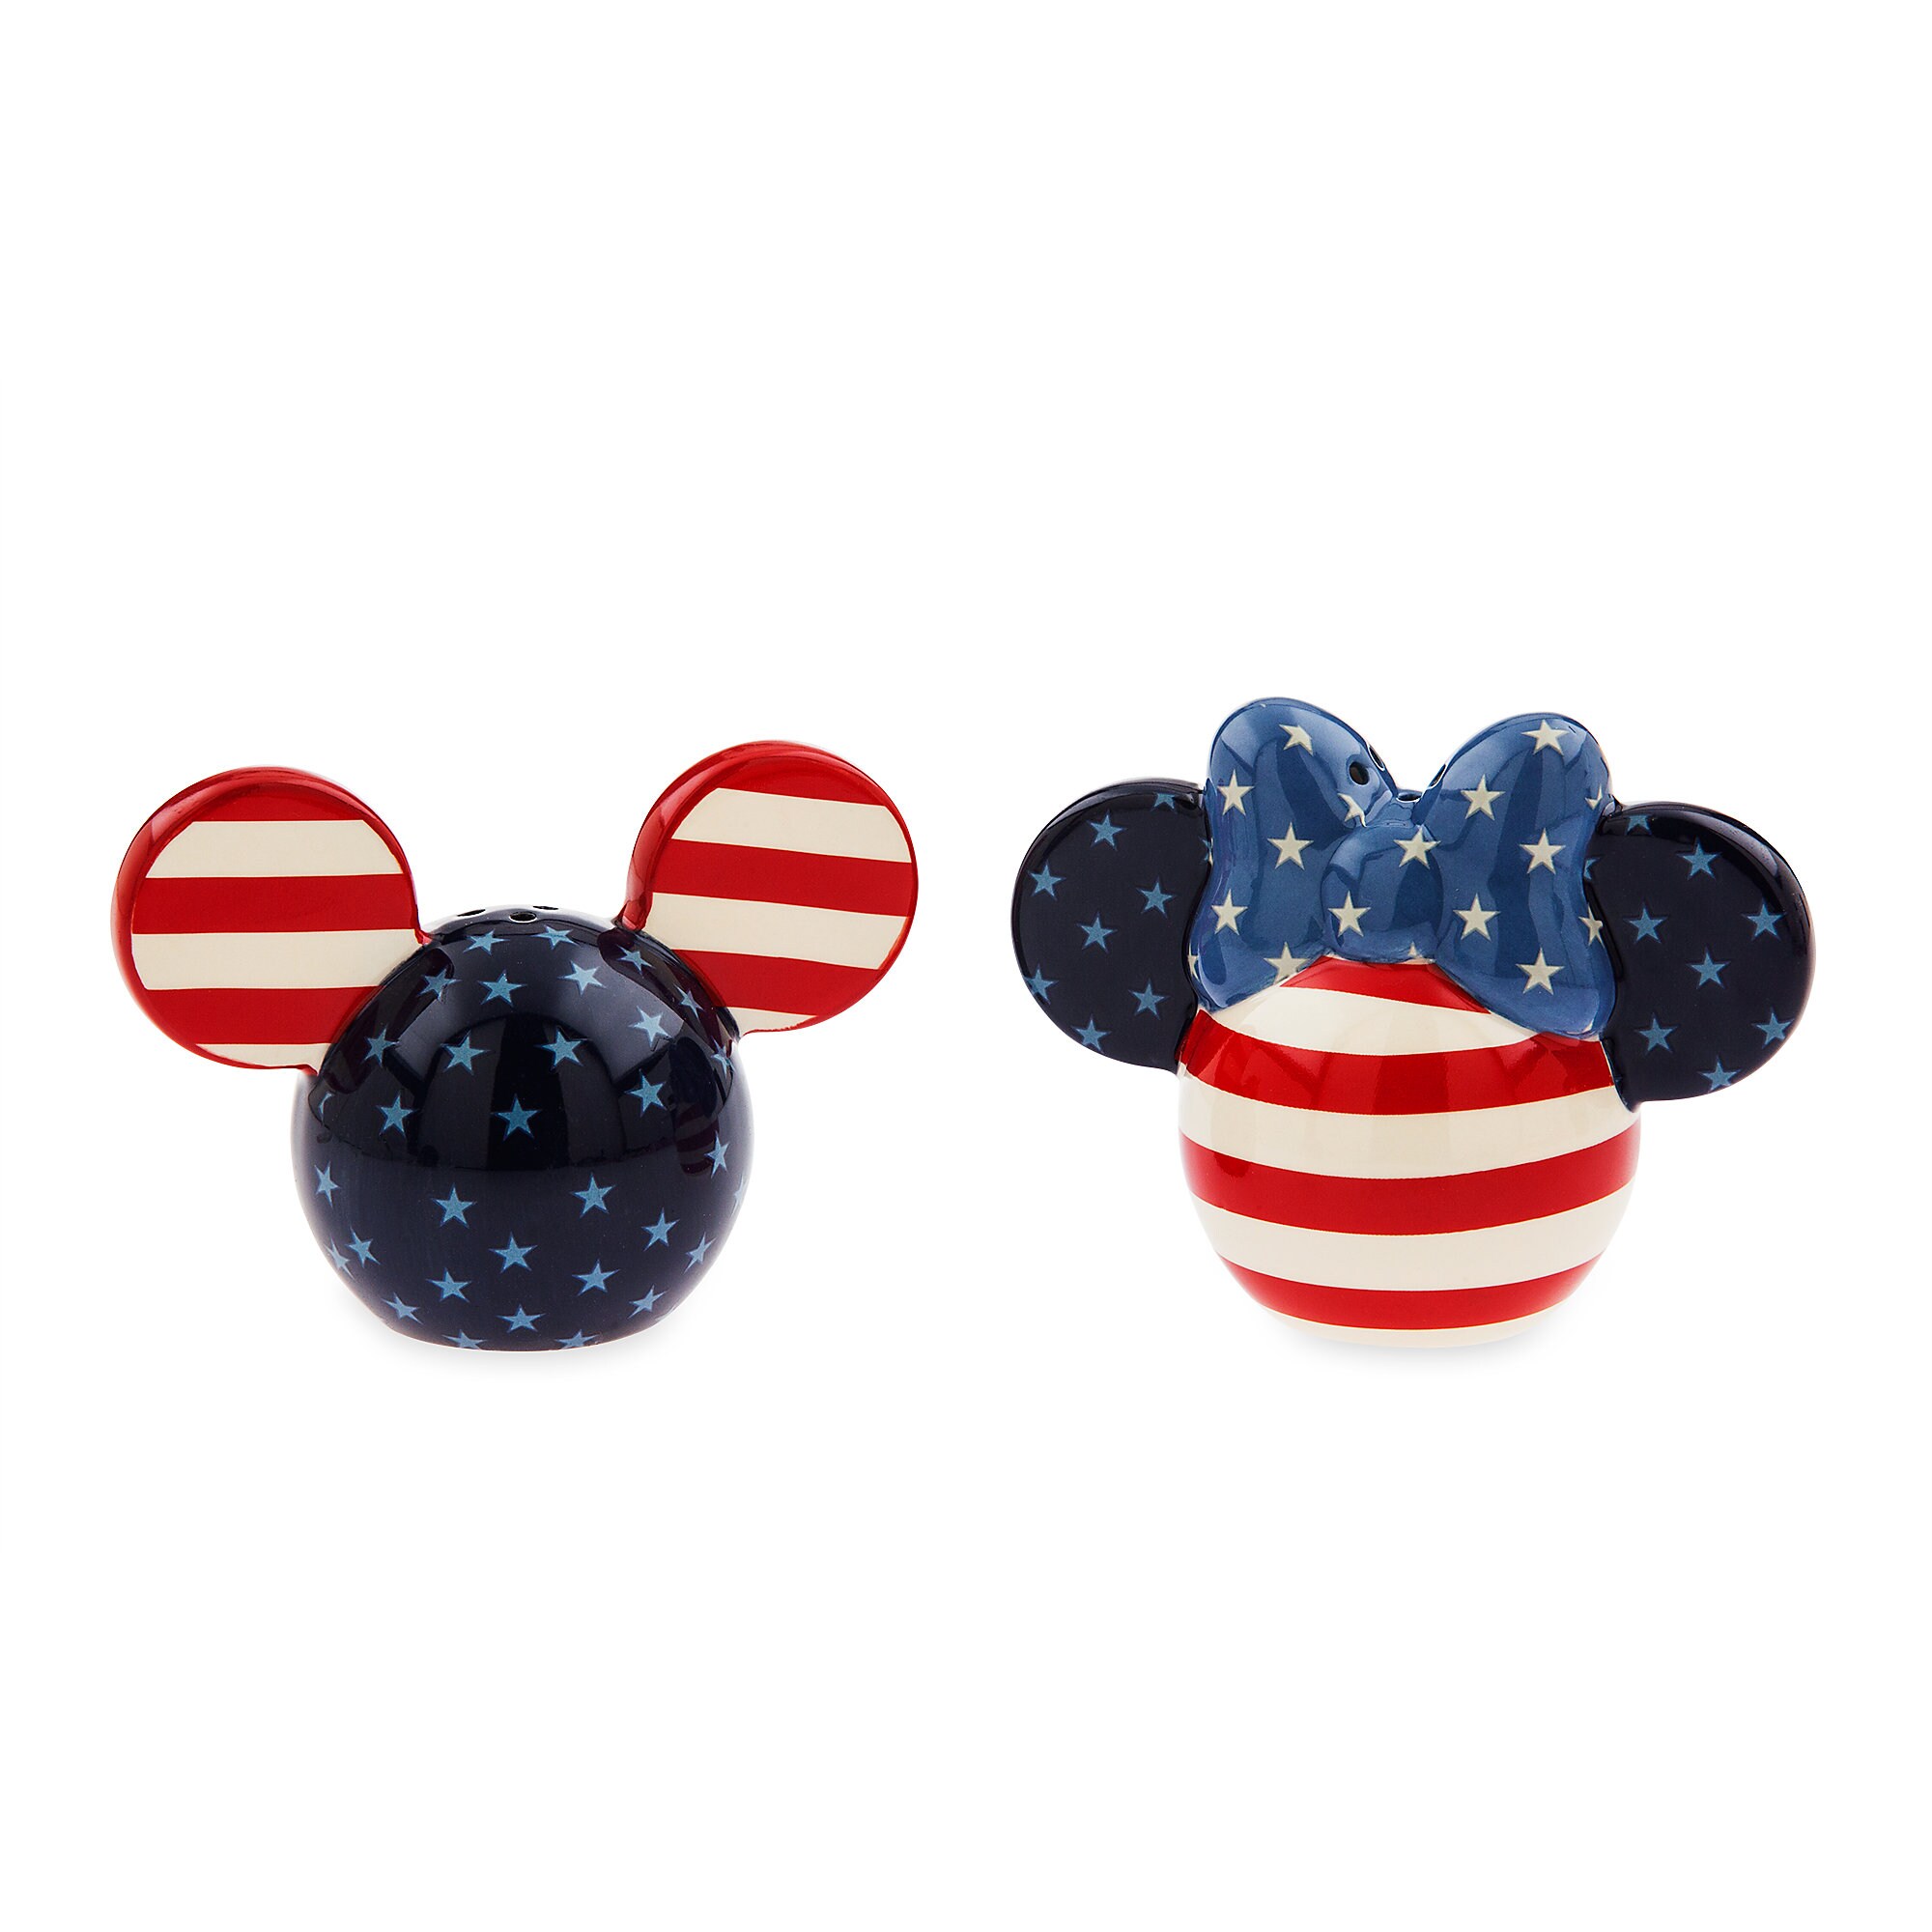 Mickey and Minnie Mouse Americana Salt and Pepper Set